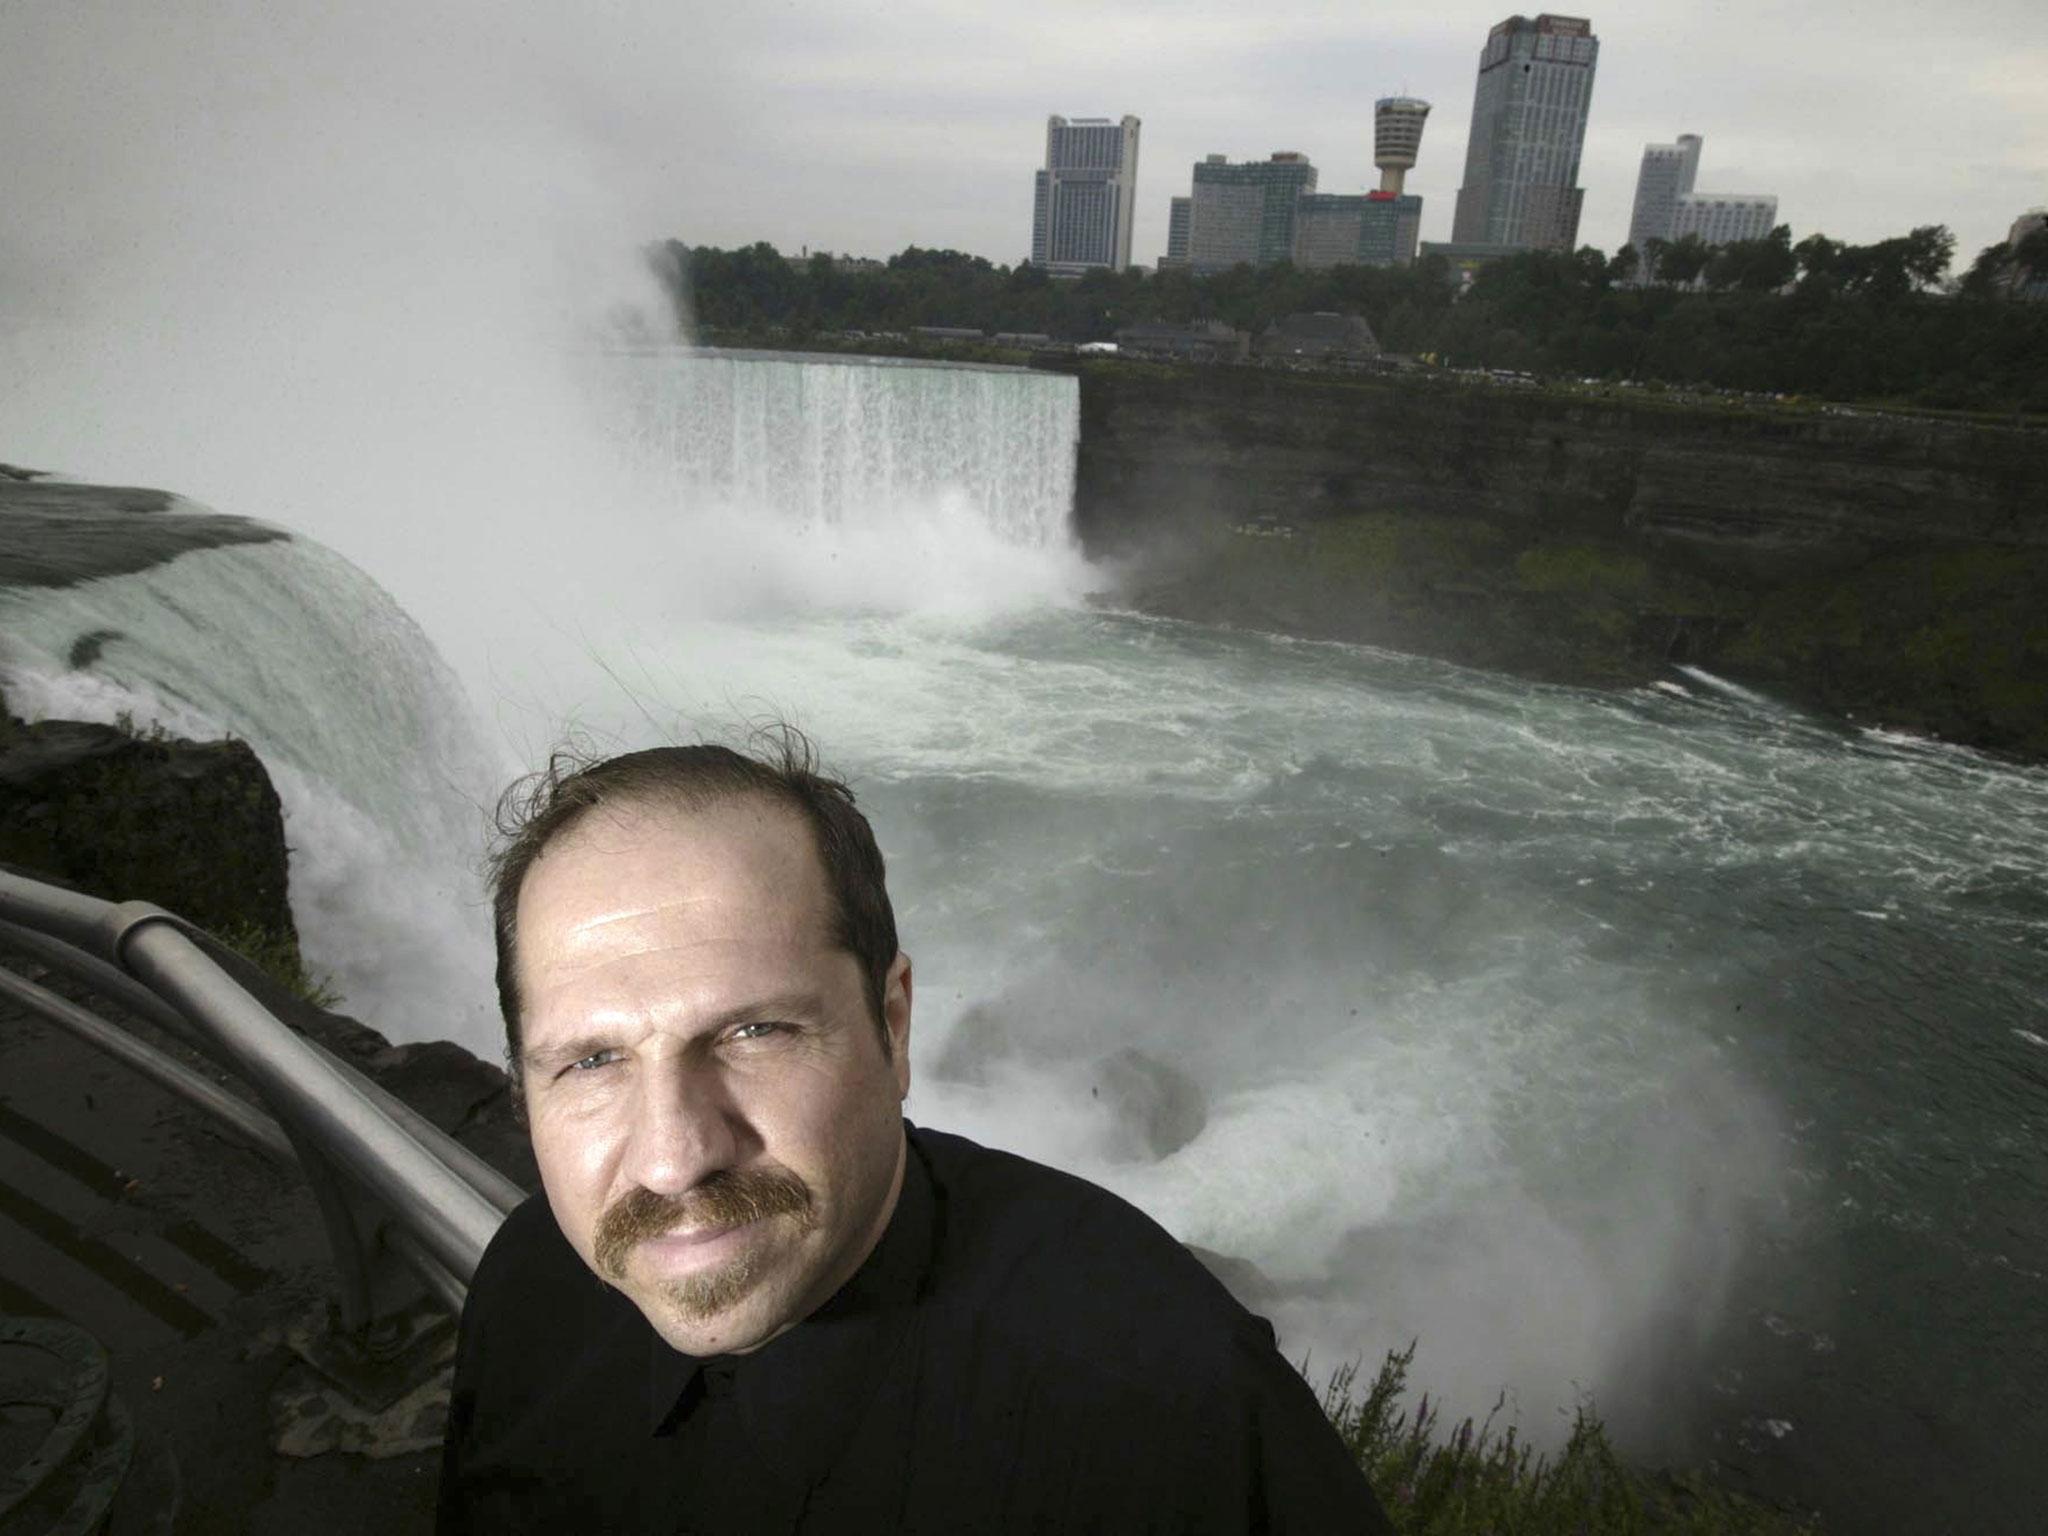 Man dies after going over Niagara Falls in an inflatable ball The